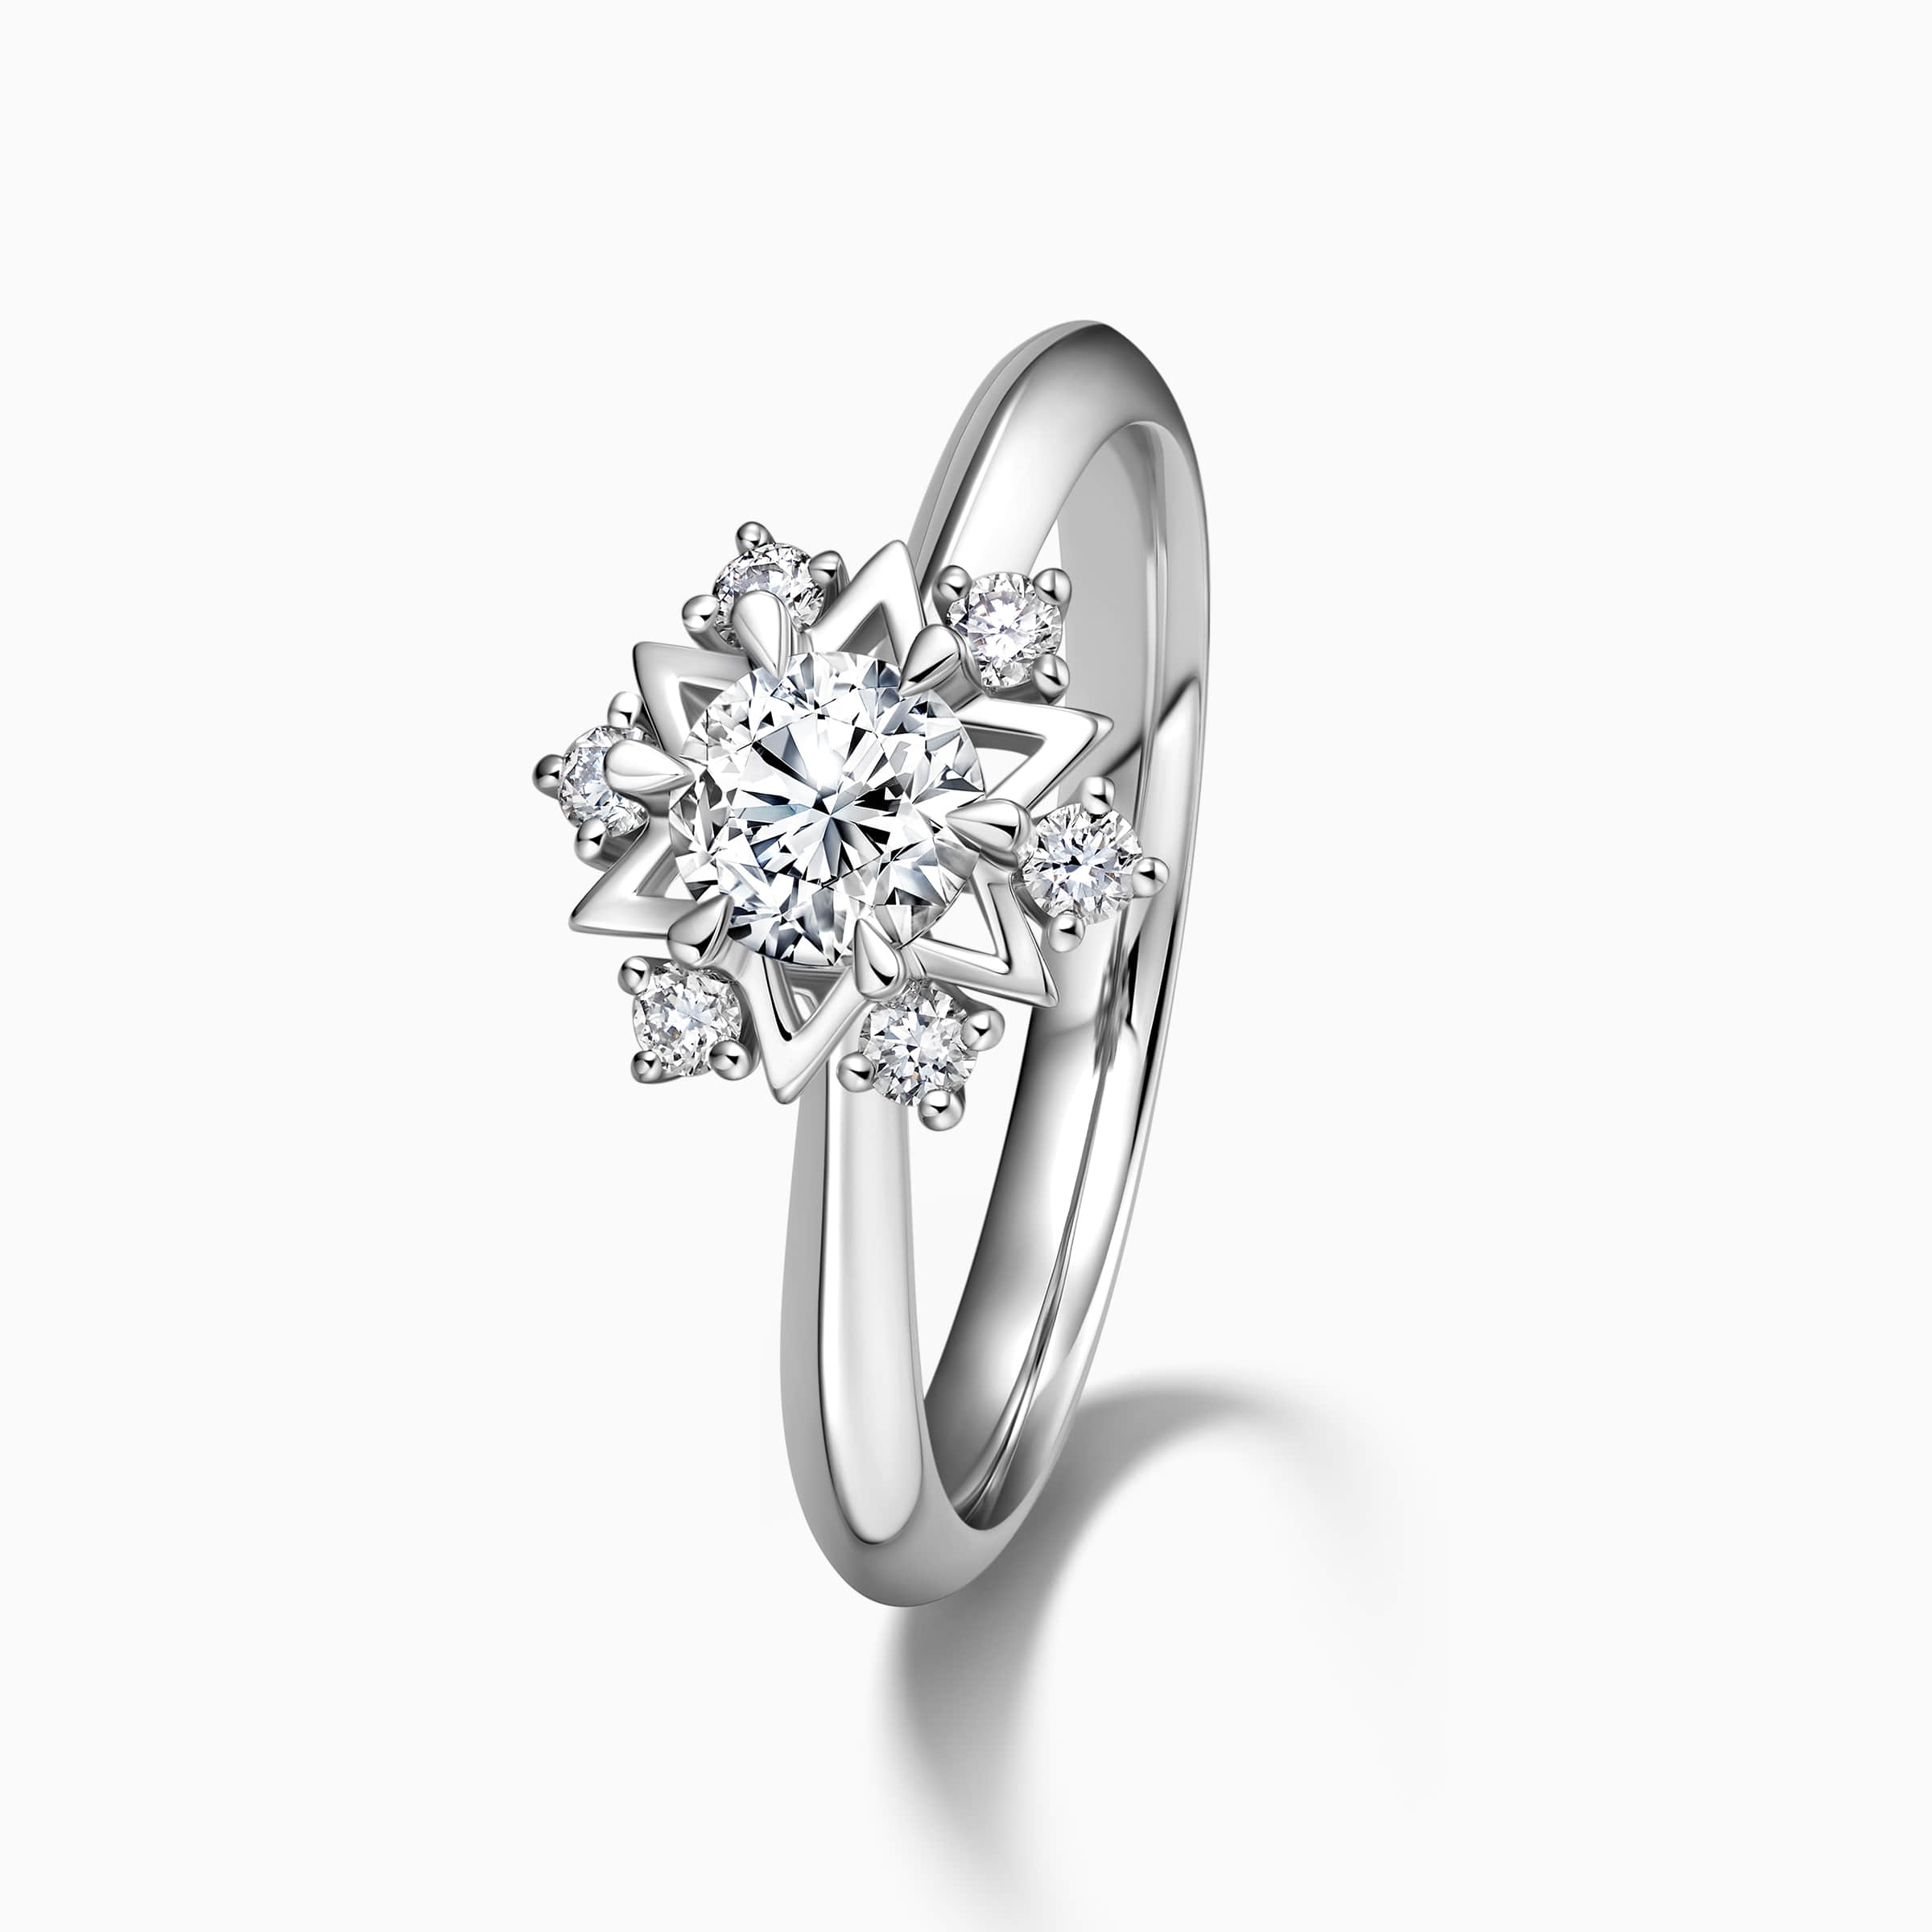 Darry Ring star engagement ring top view